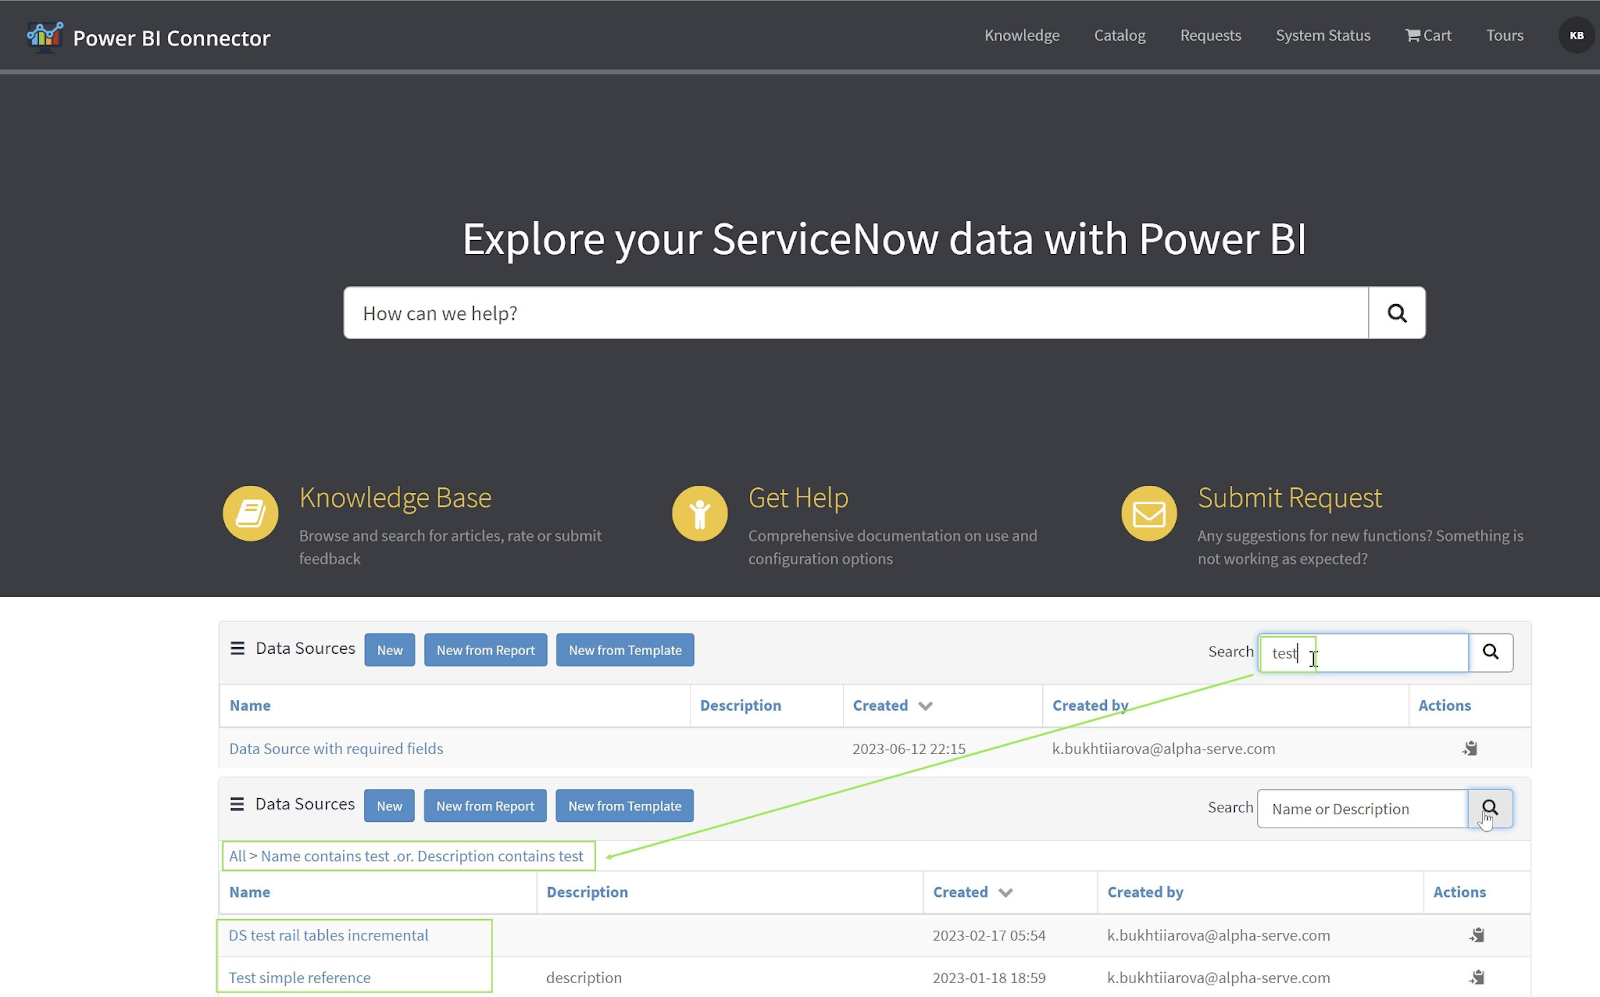 Power BI Connector page